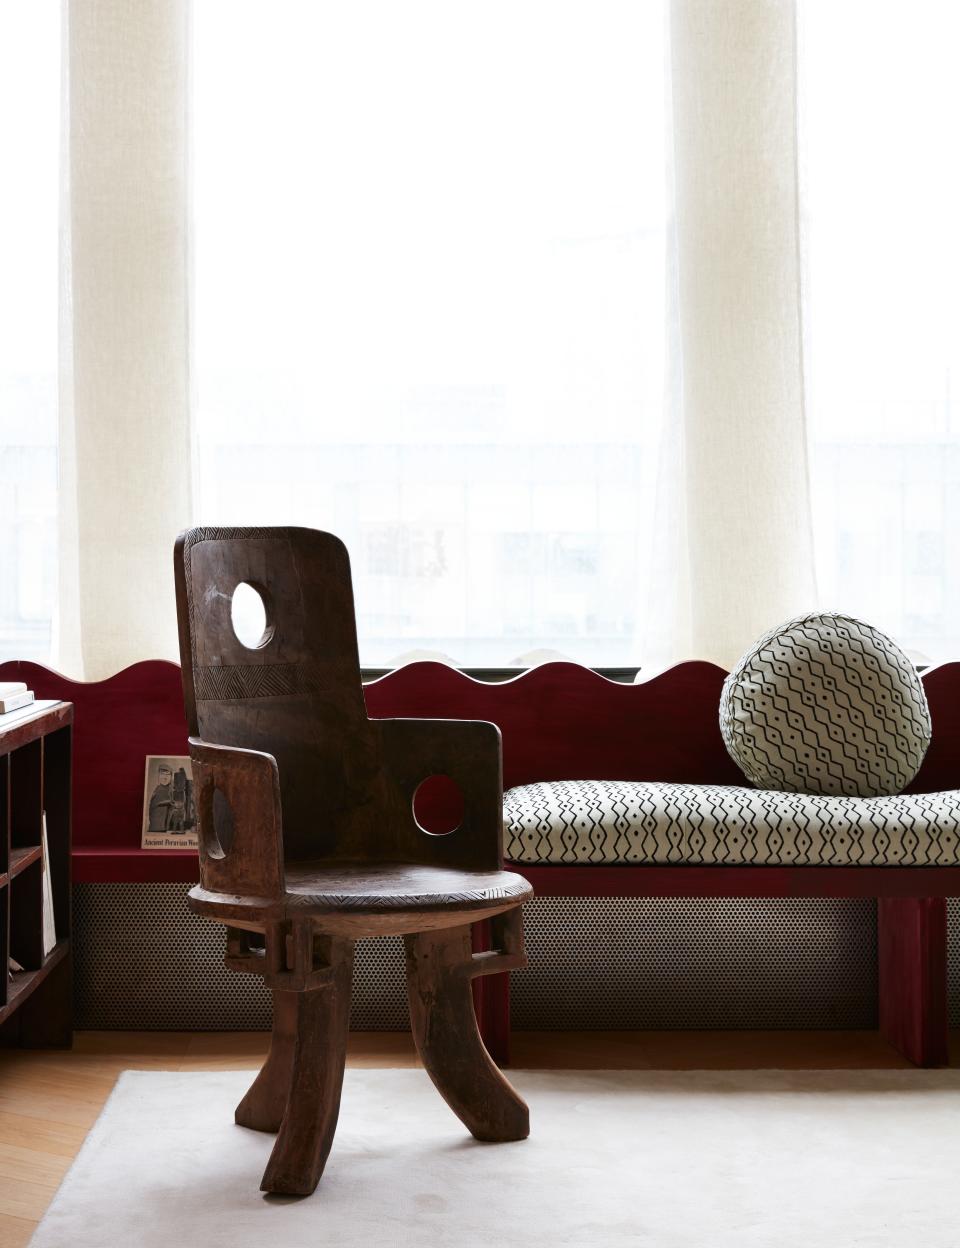 In the living room, Valle designed a low wood screen along the window wall that turns into a window seat. The wood is stained a rich red; the fabric on the cushions is from Le Manach.